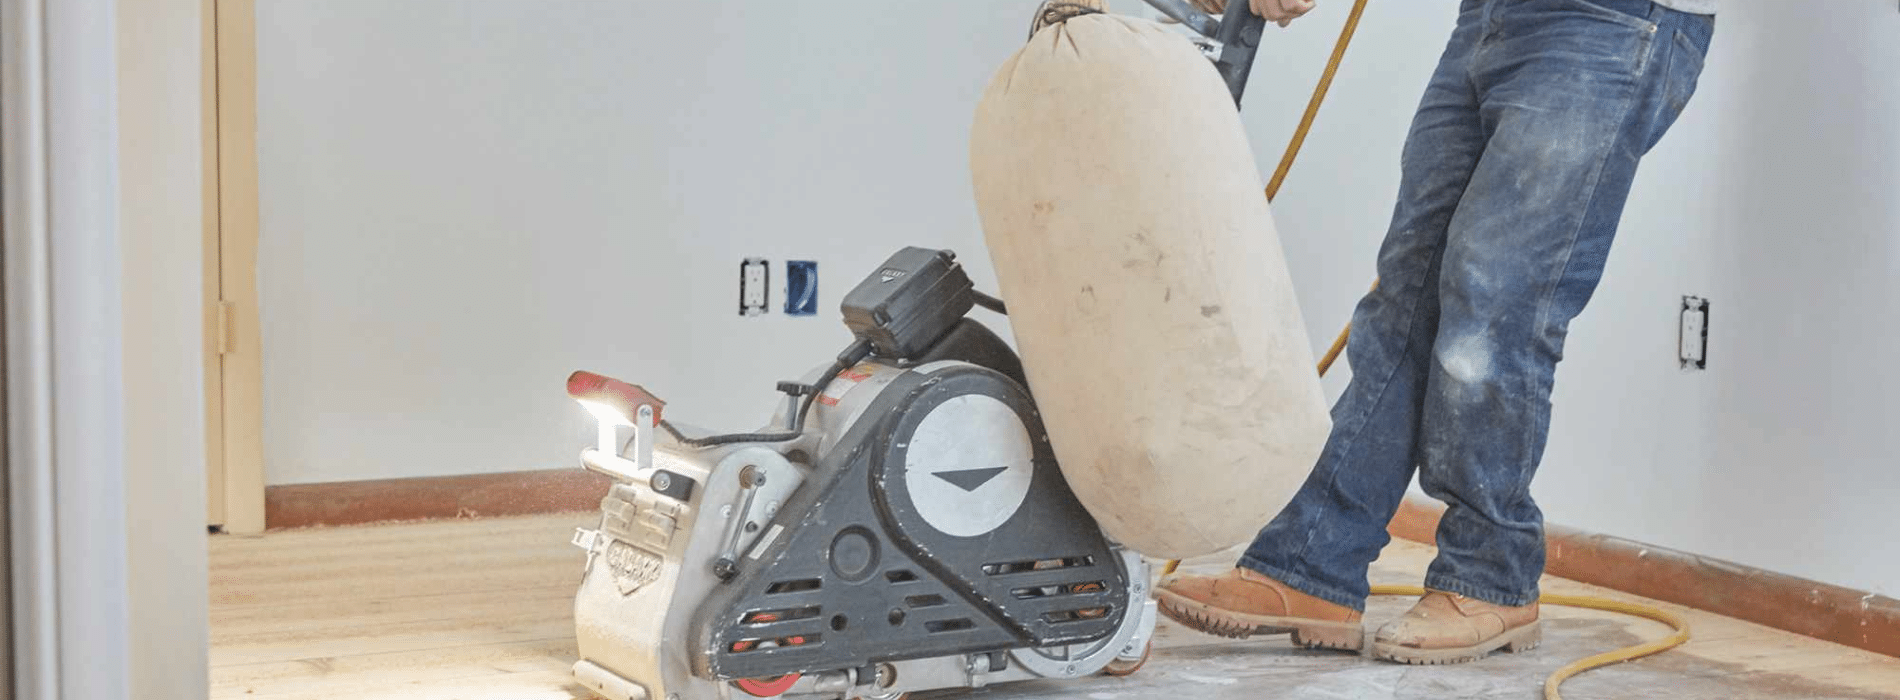 Mr Sander® use a Bona Scorpion drum sander with a dimension of 200mm, 1.5 kW effect, 240V voltage, and 50Hz frequency in Rush Green, RM7. This powerful equipment is connected to a dust extraction system with a HEPA filter, ensuring a clean and efficient sanding.